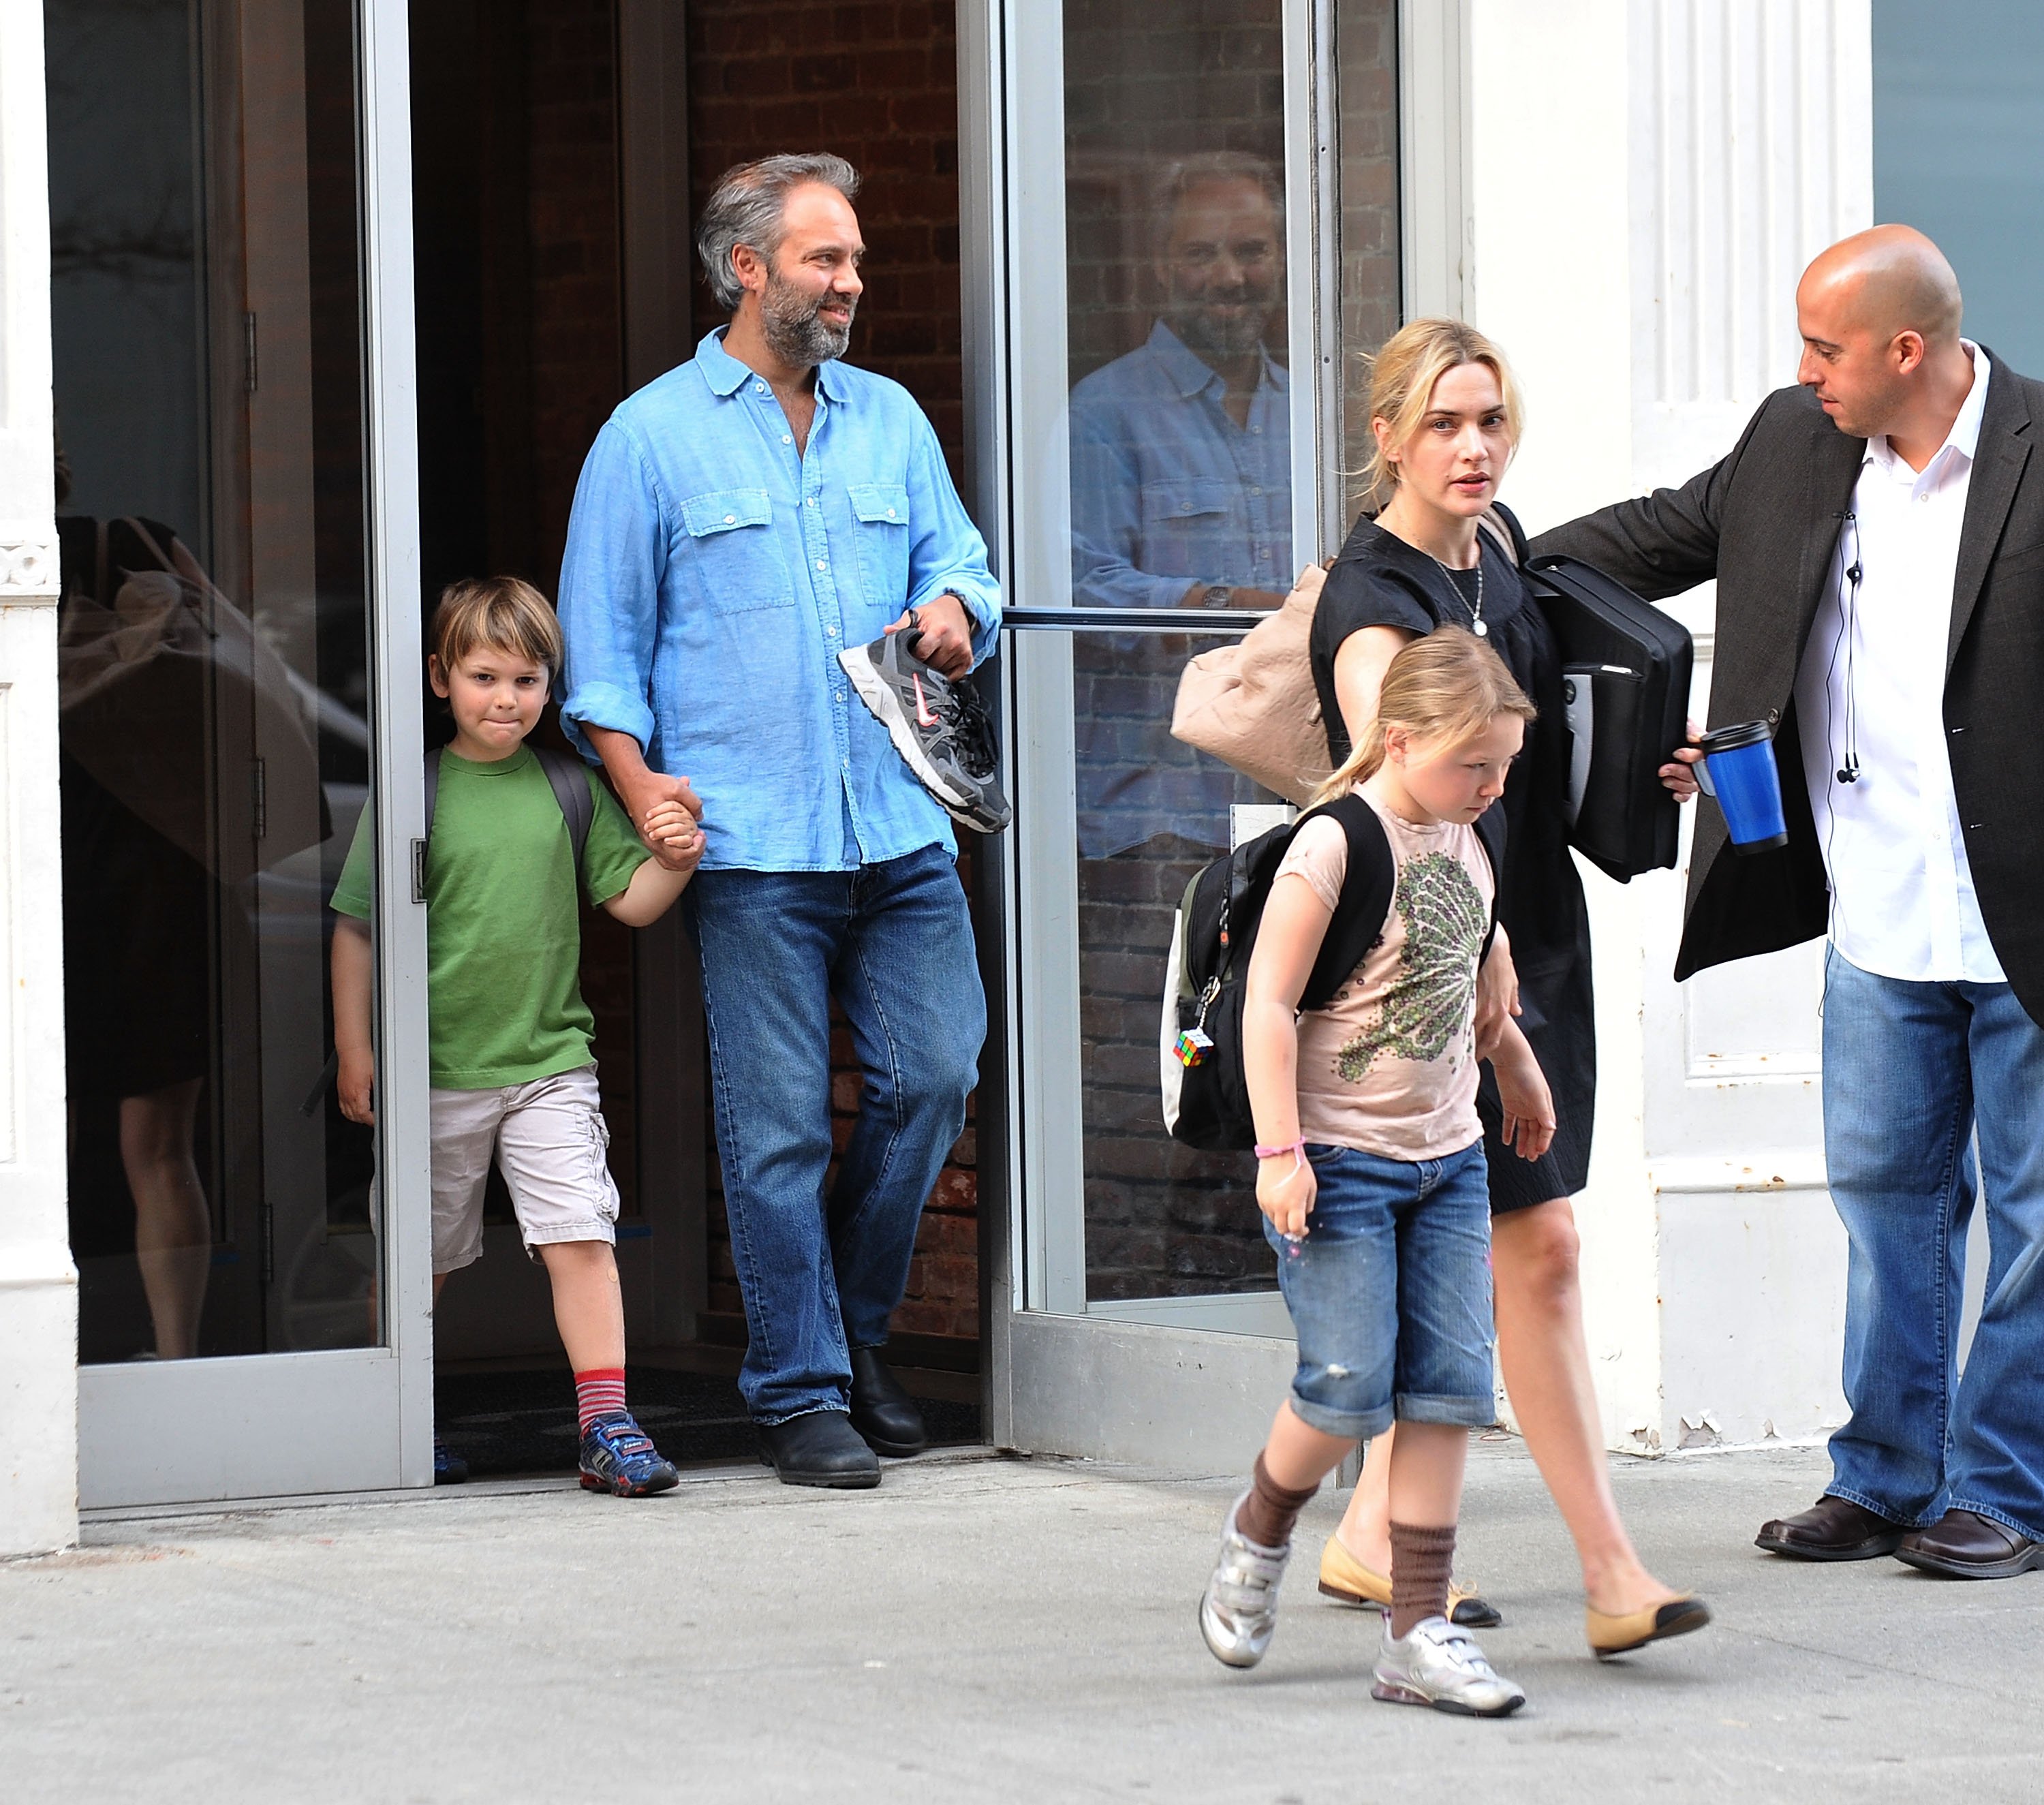  Sam Mendes, Kate Winslet and their children are seen on the streets of Manhattan on April 8, 2010 in New York City | Source: Getty Images